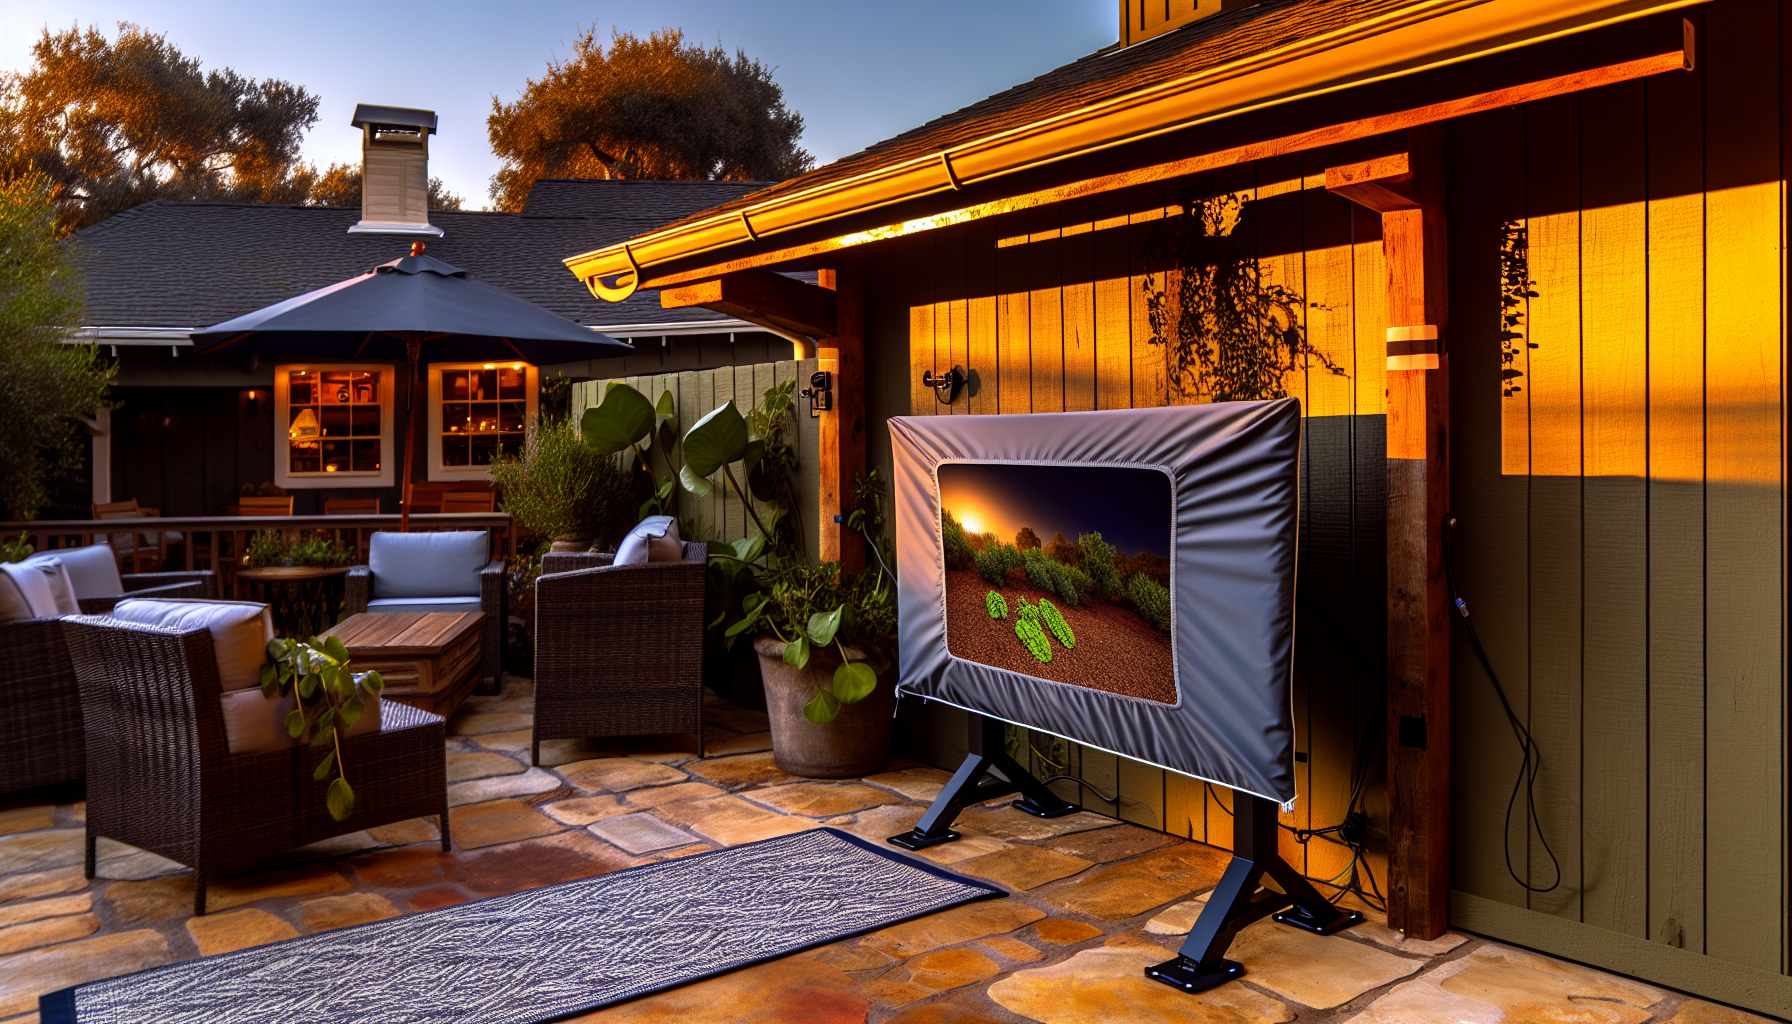 Half TV cover for partially sheltered outdoor TVs